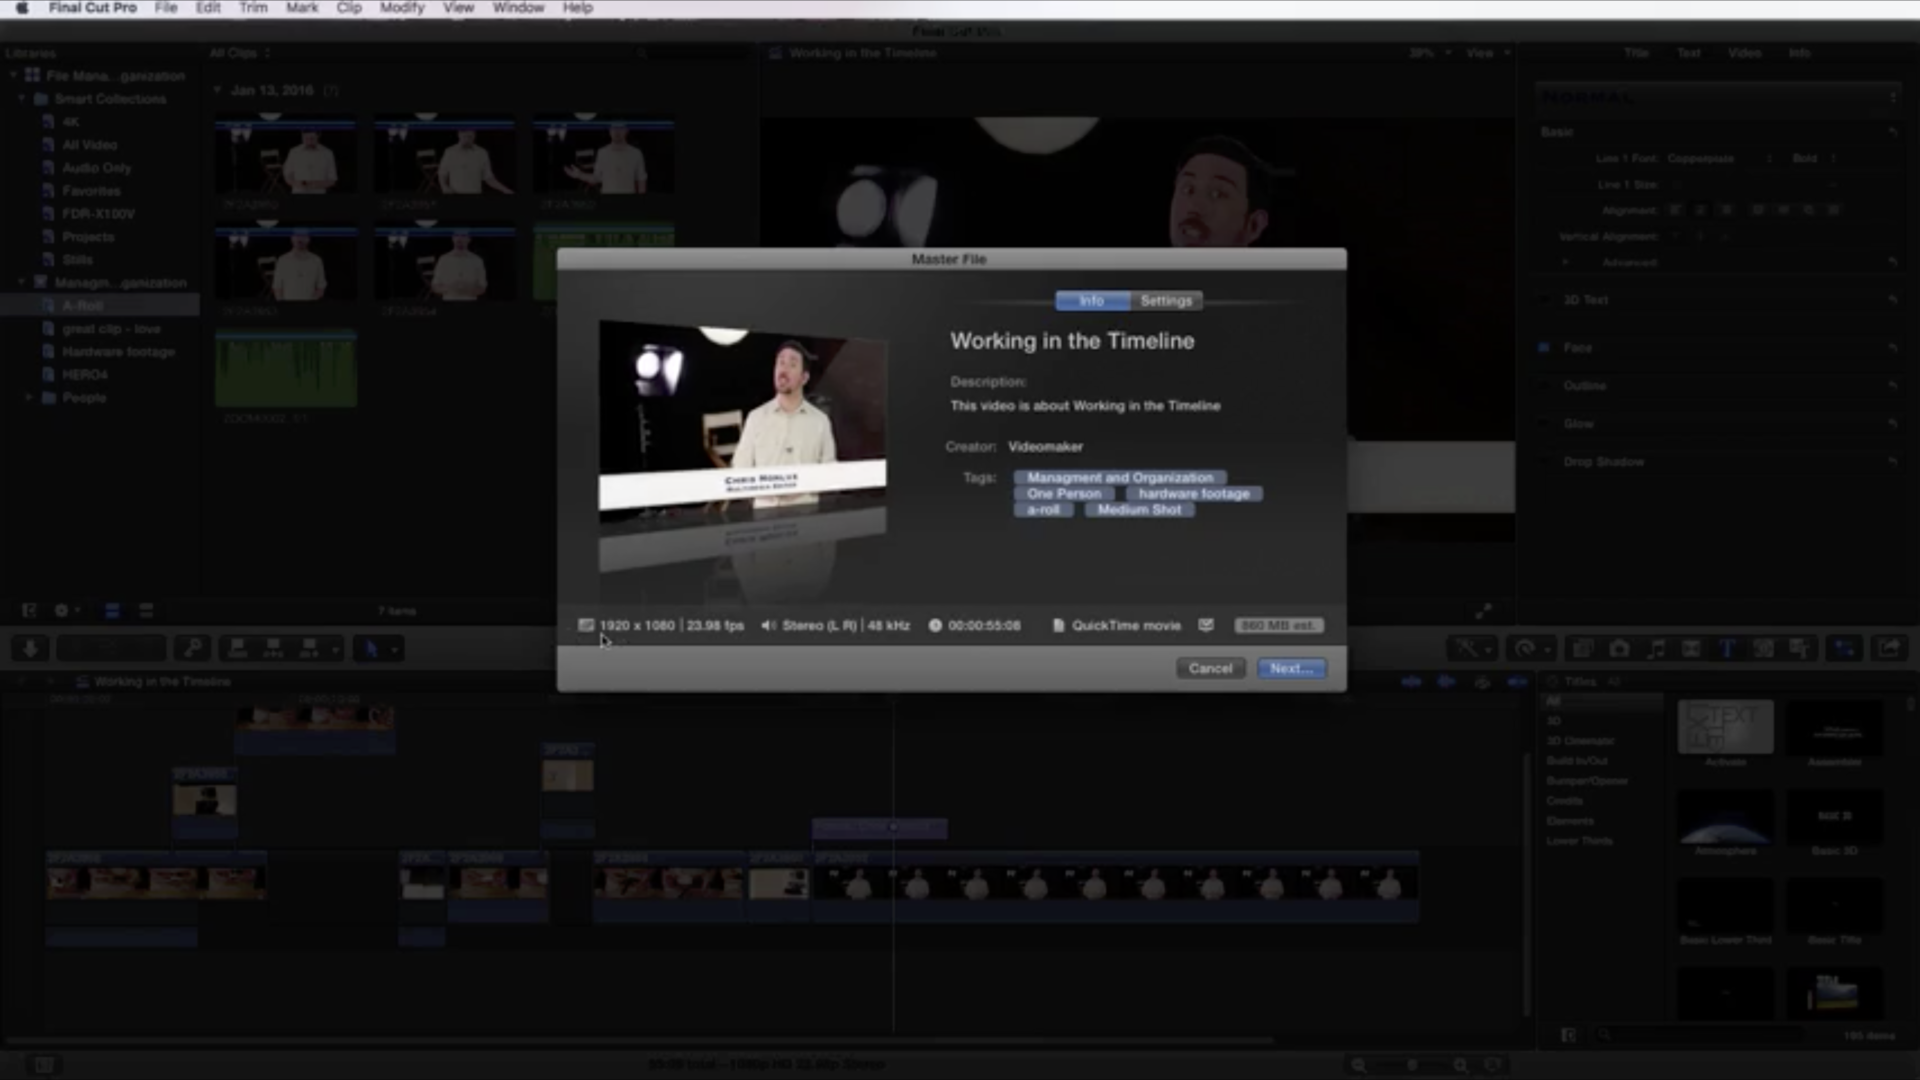 where are projects final cut pro x 10.3.4